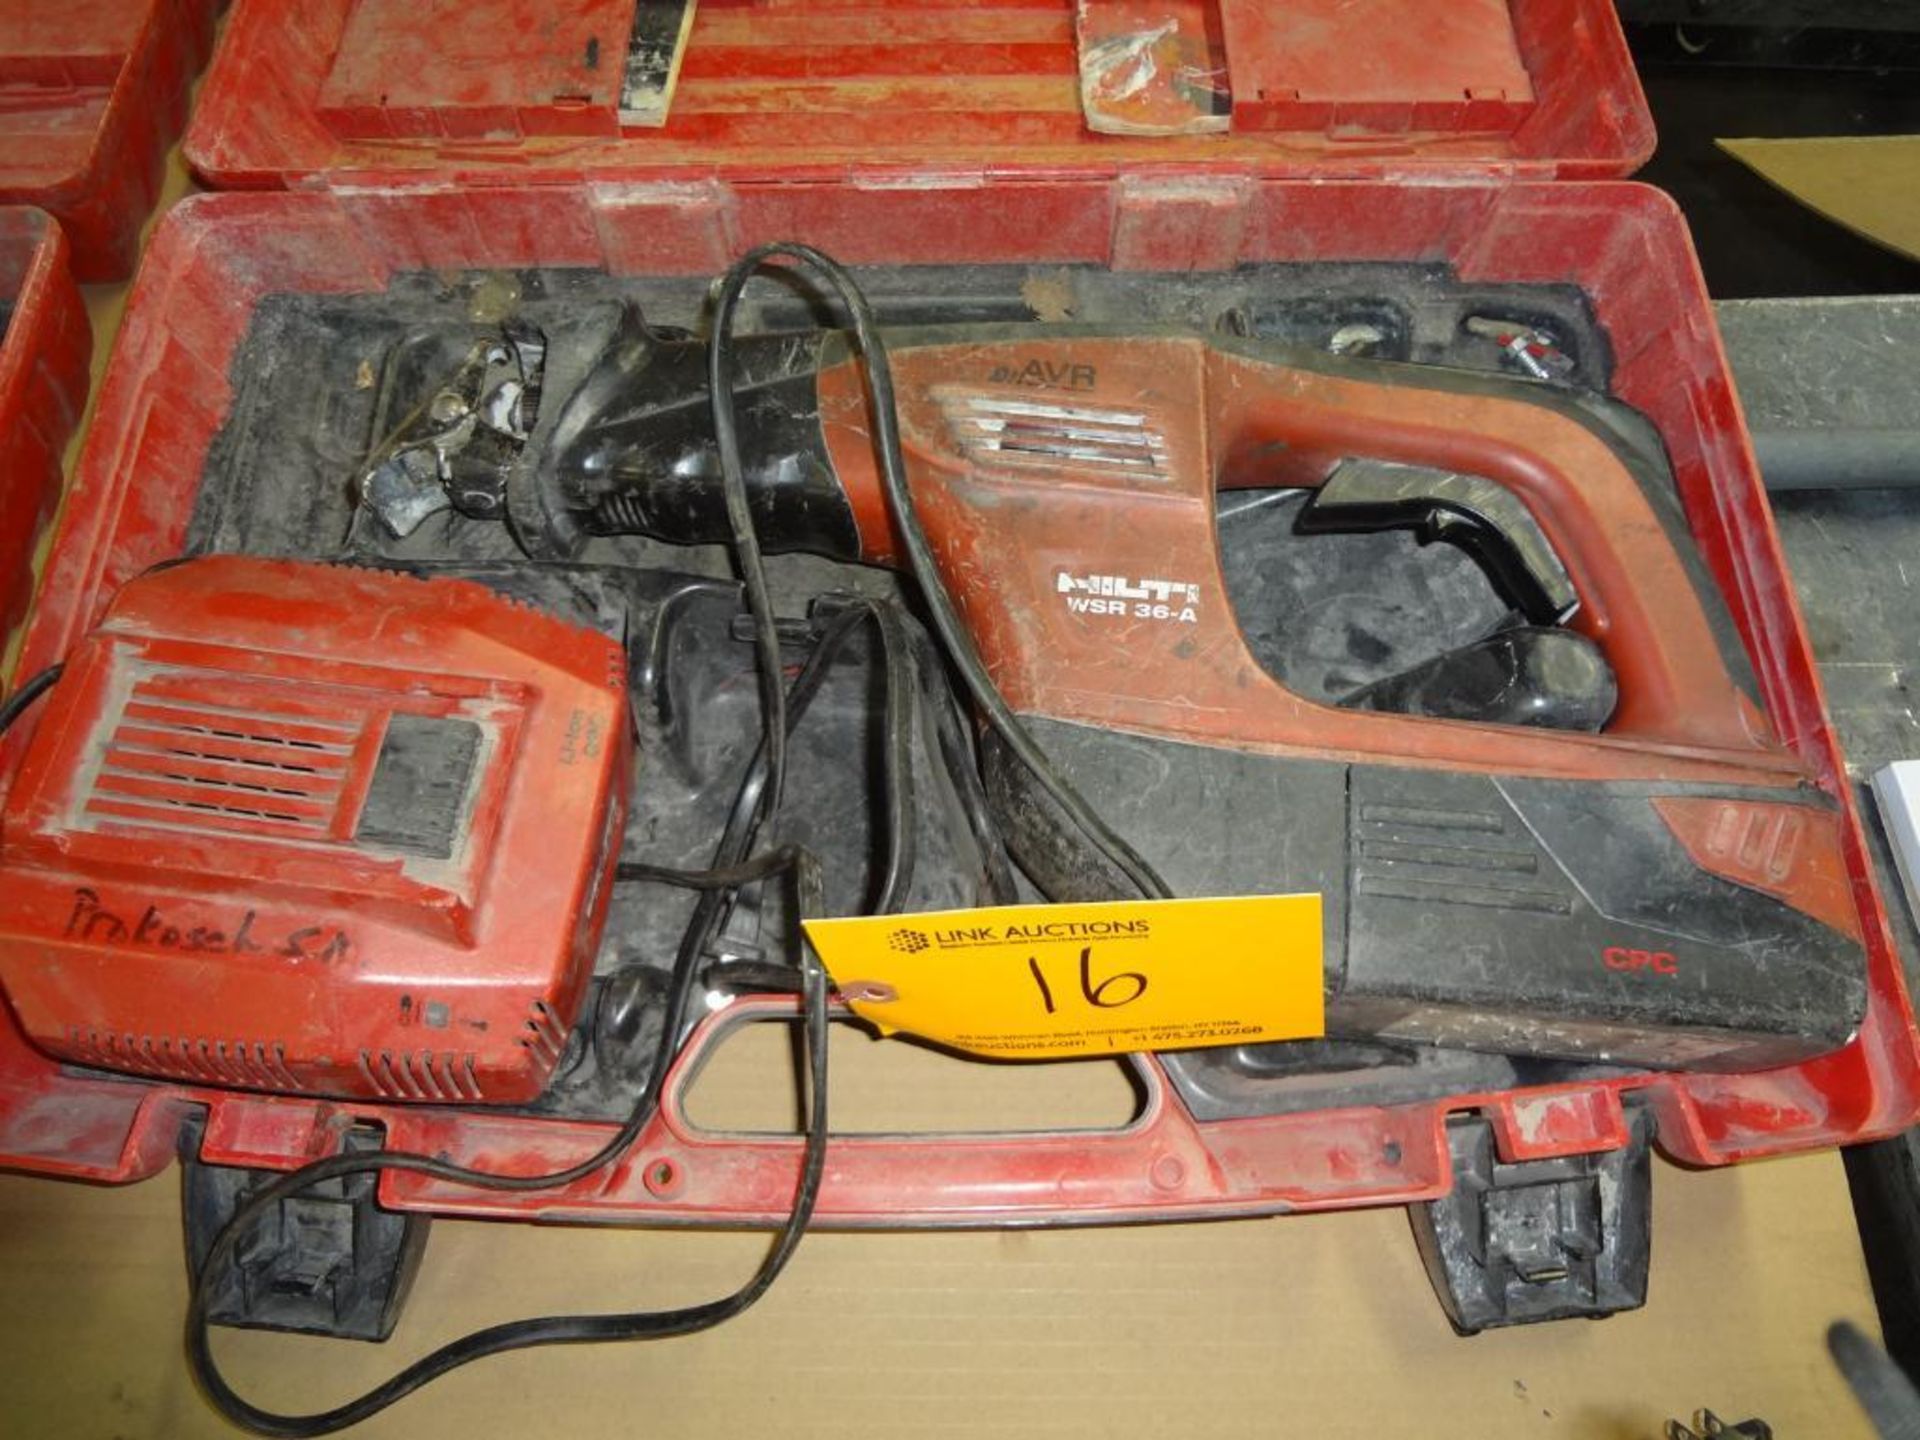 Hilti Model WSR-36A Battery Operated Sawzall With Battery And Charger